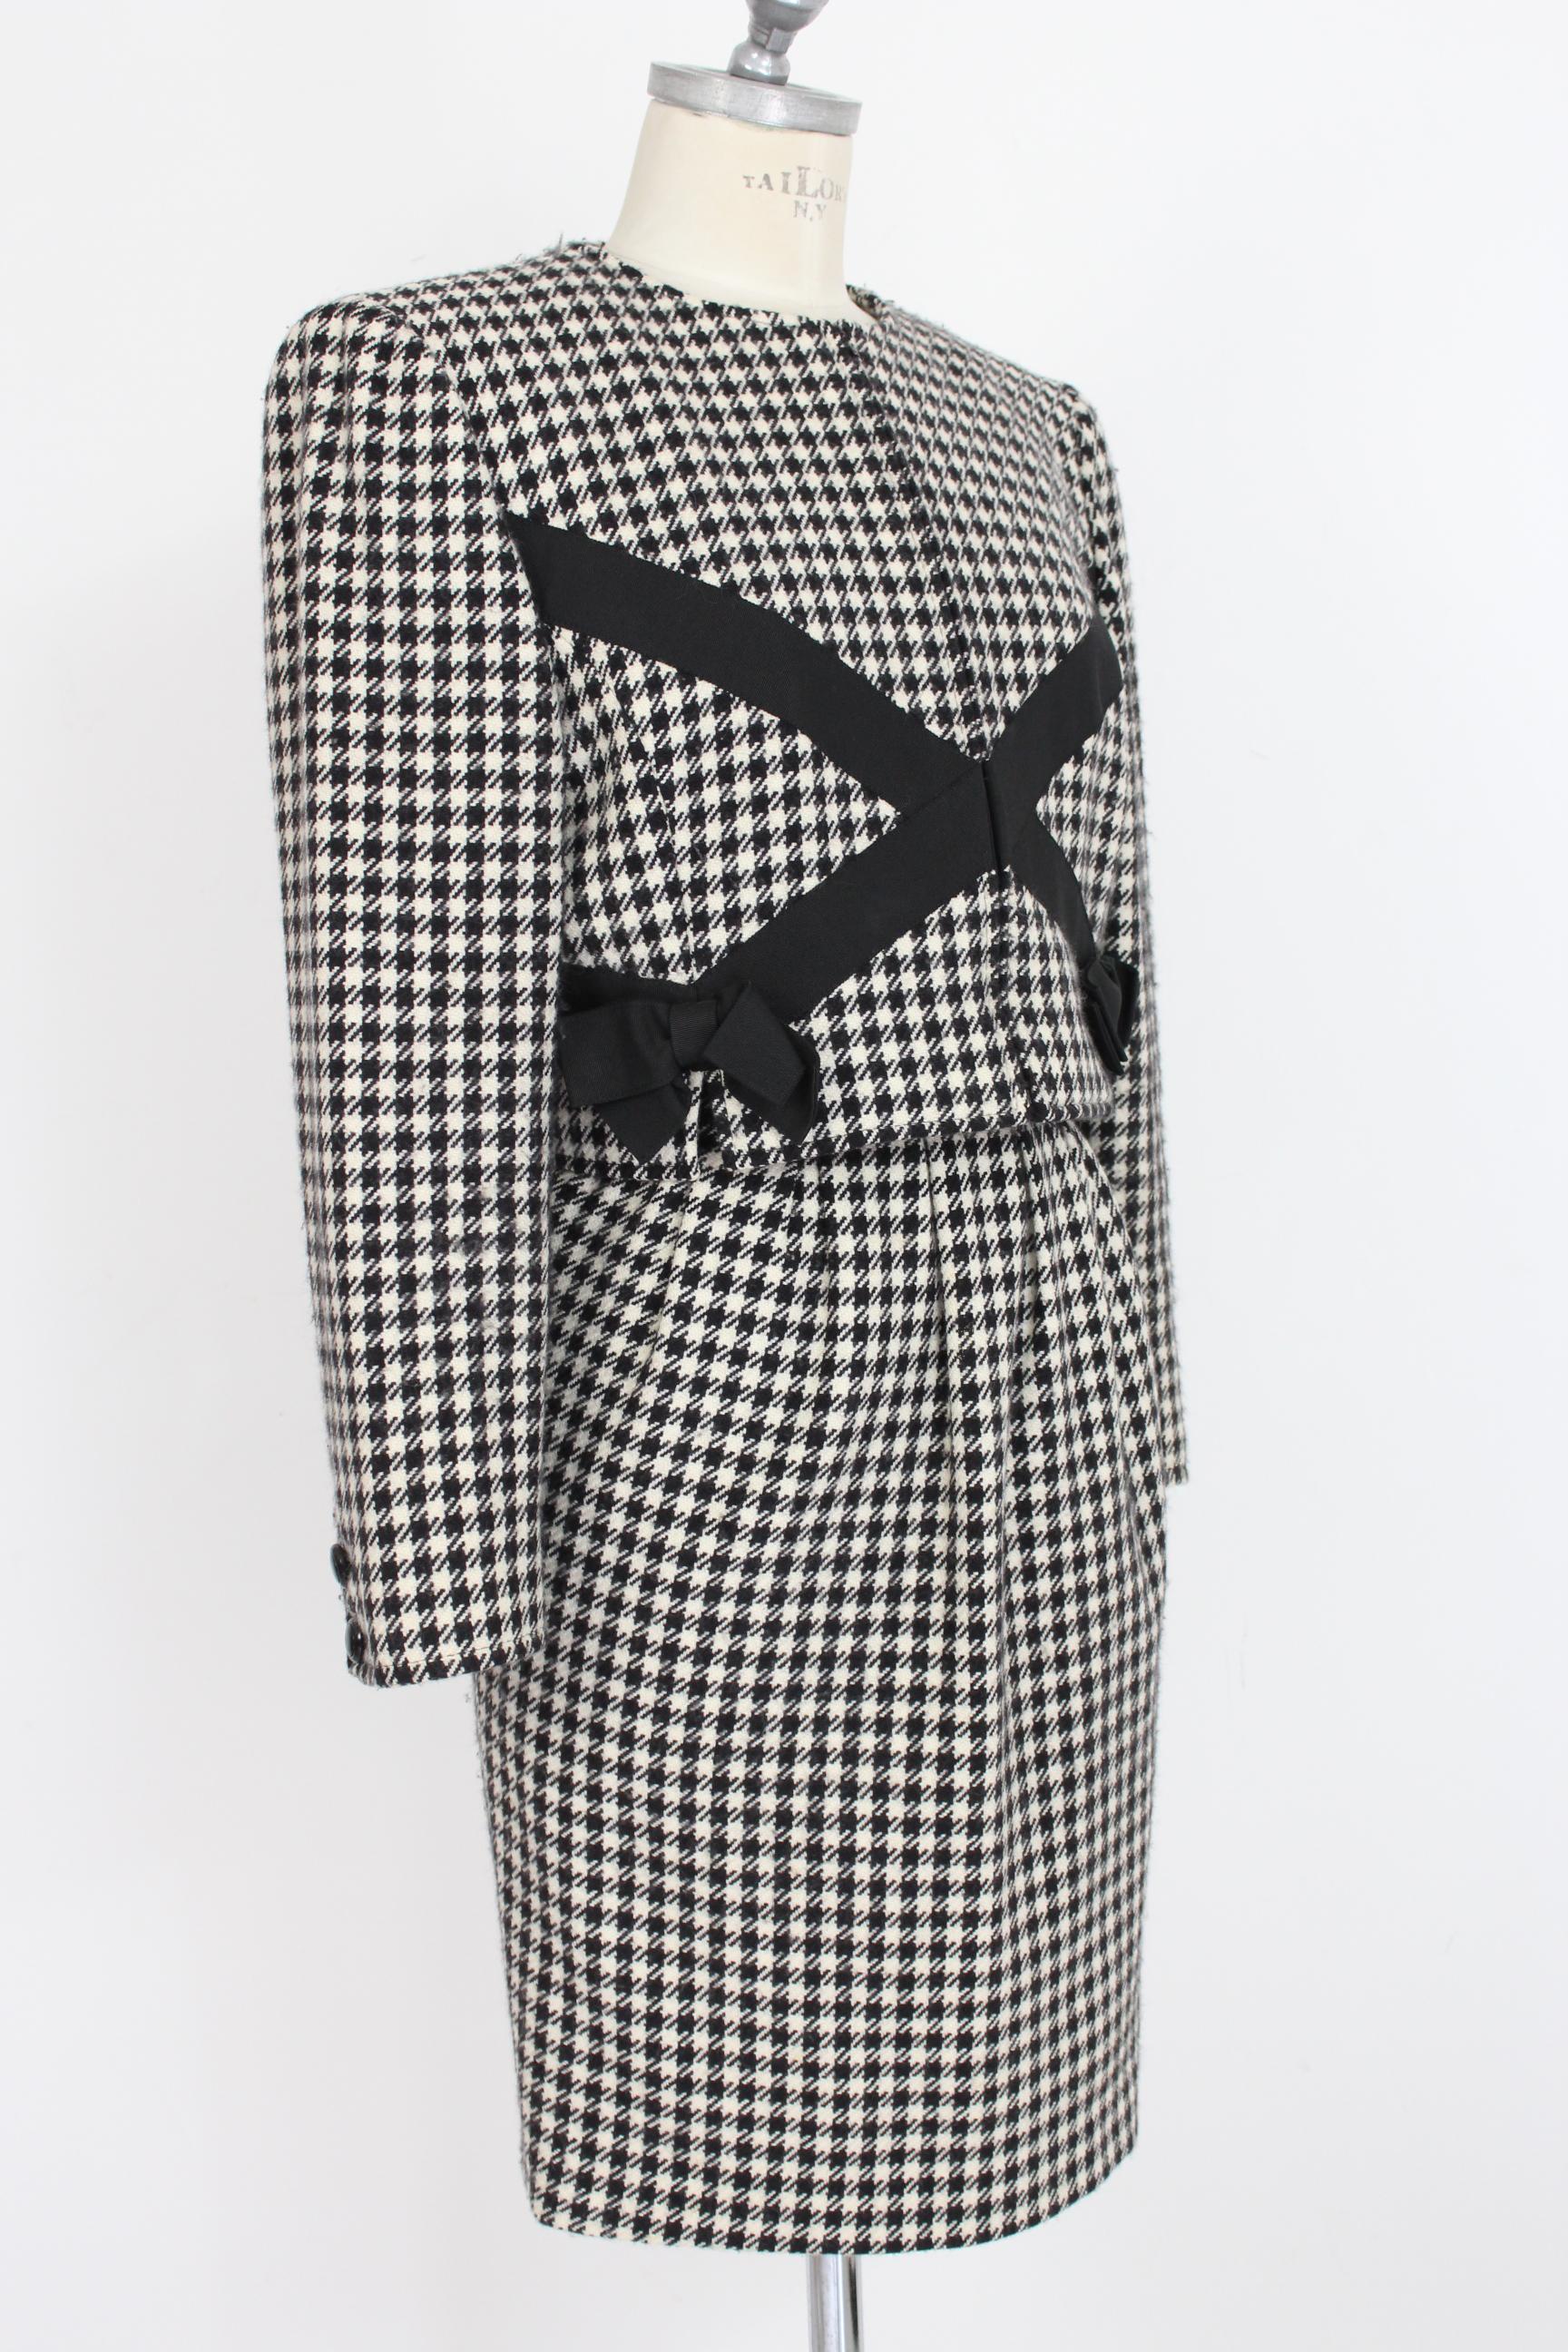 Valentino Boutique Black White Wool Houndstooth Evening Skirt Suit 1980s In Excellent Condition In Brindisi, Bt